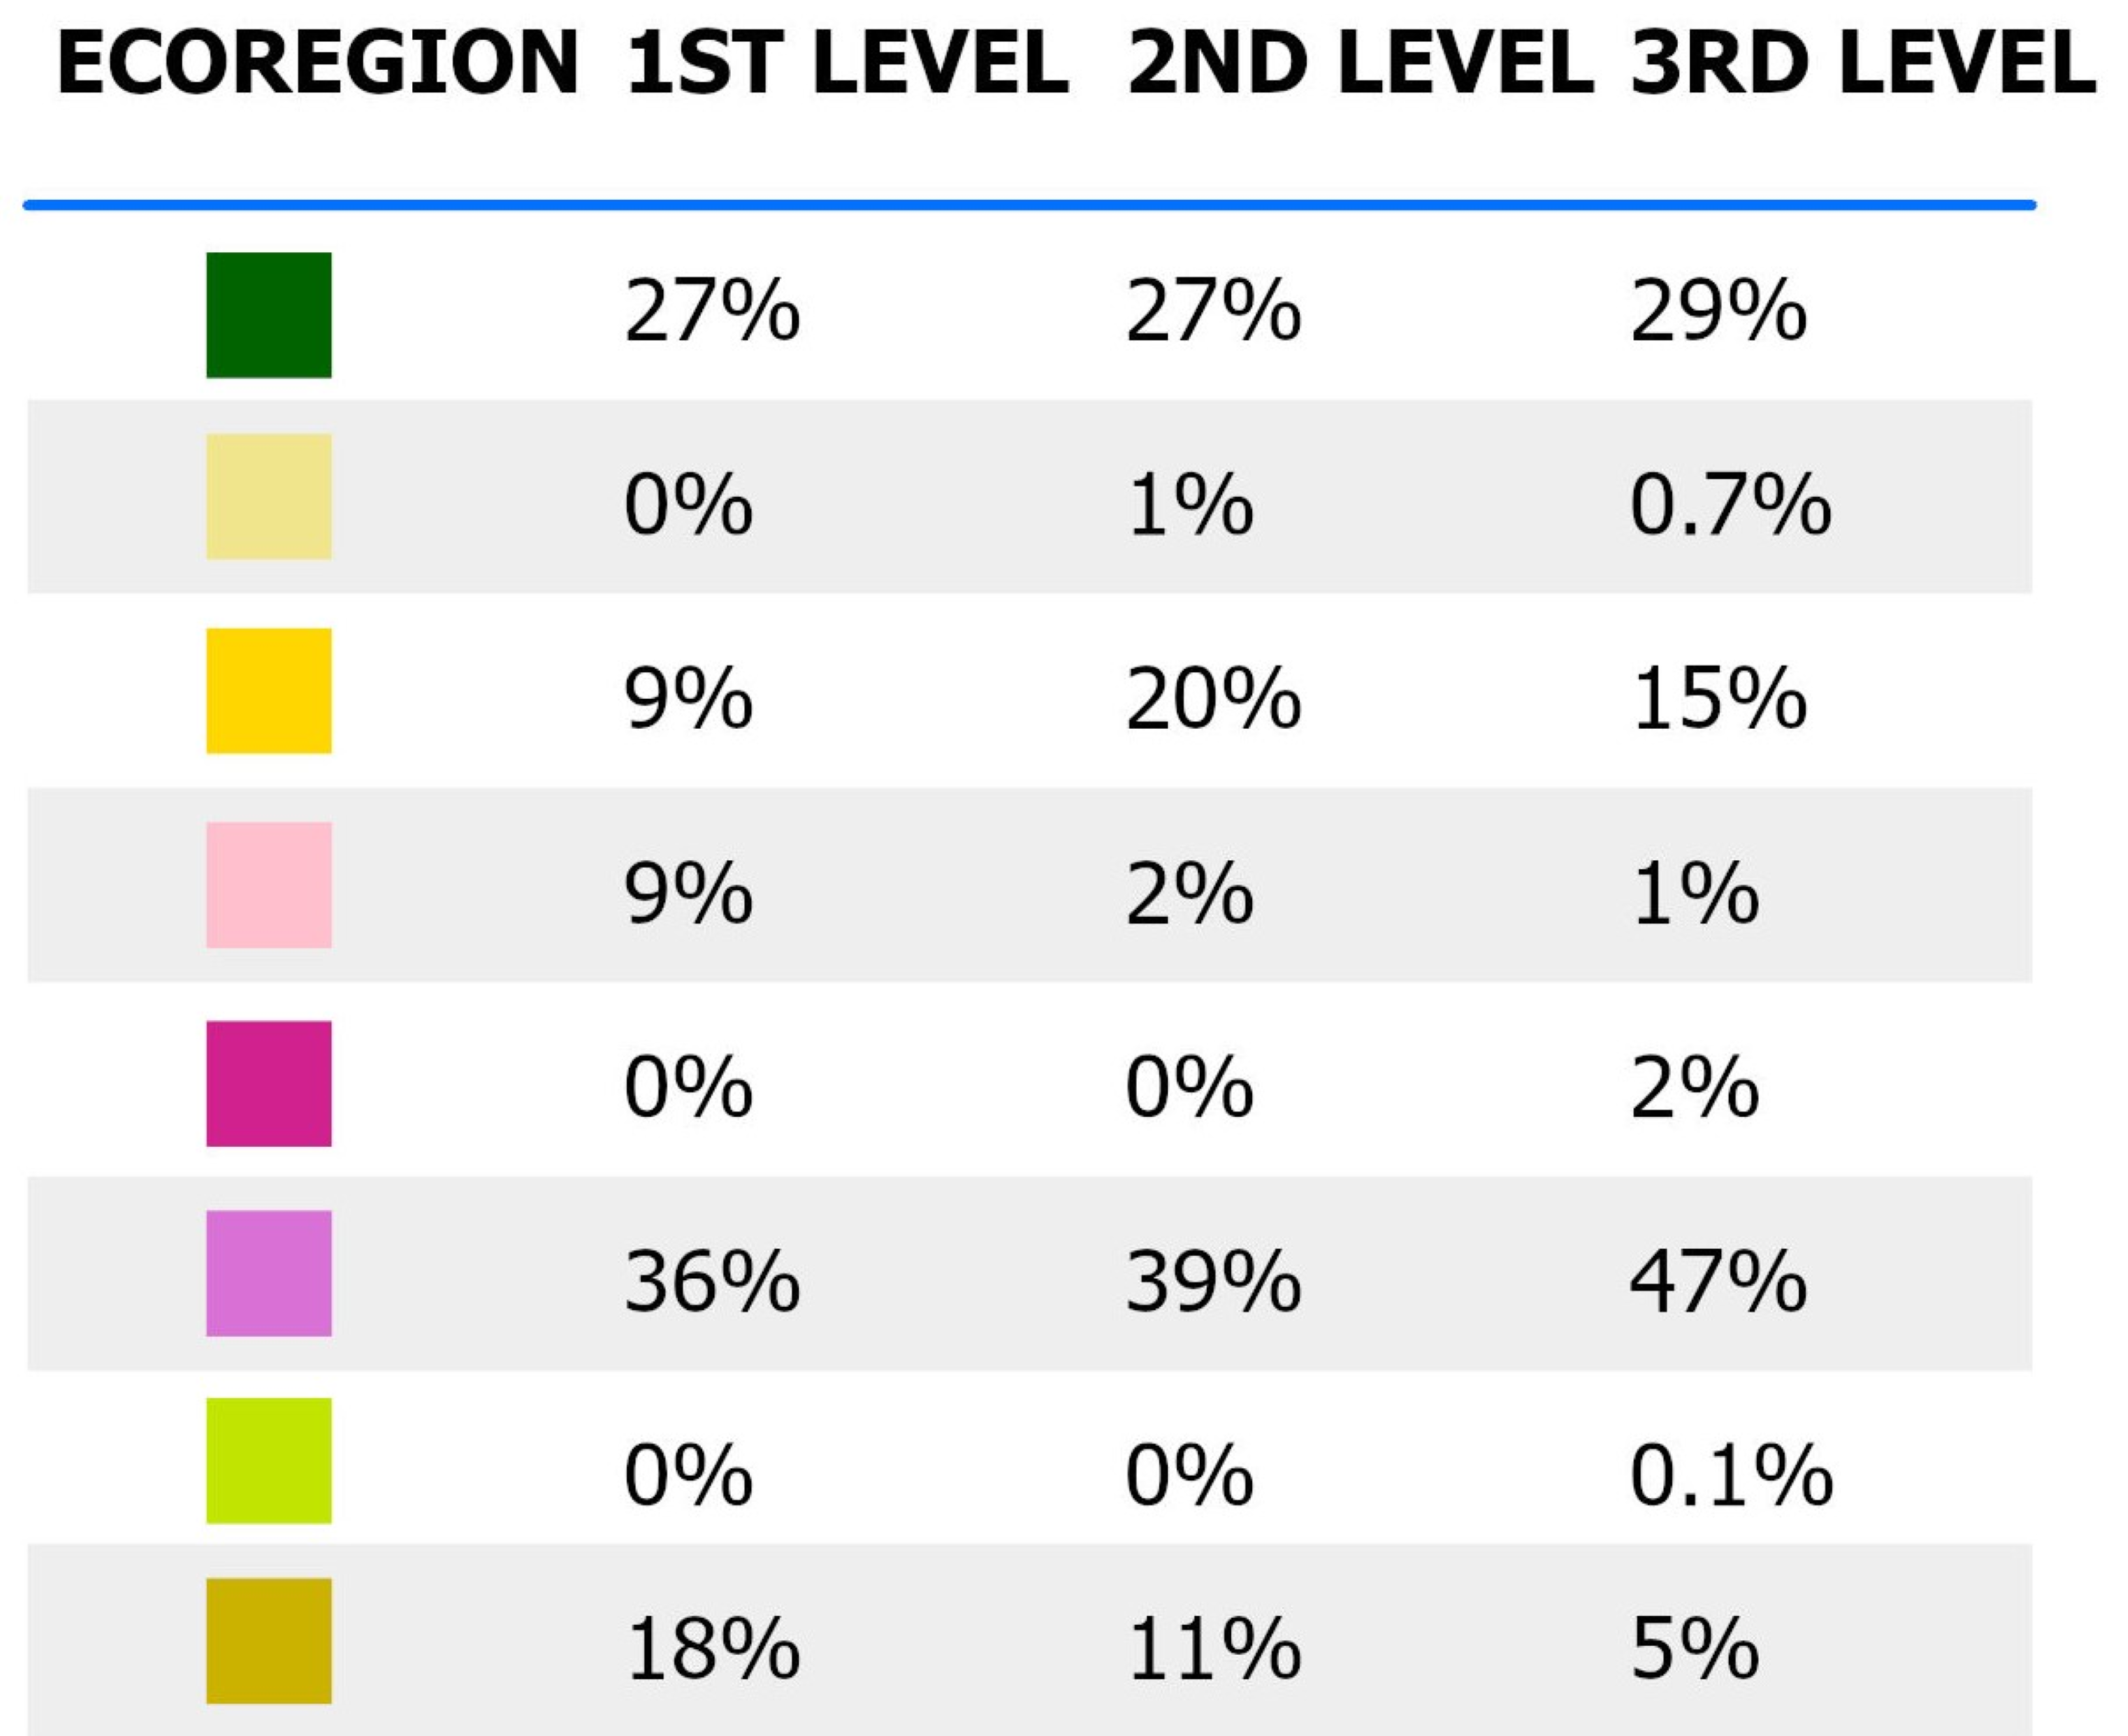 Table showing percentages of various dominant ecregions across geography levels of Ethiopia